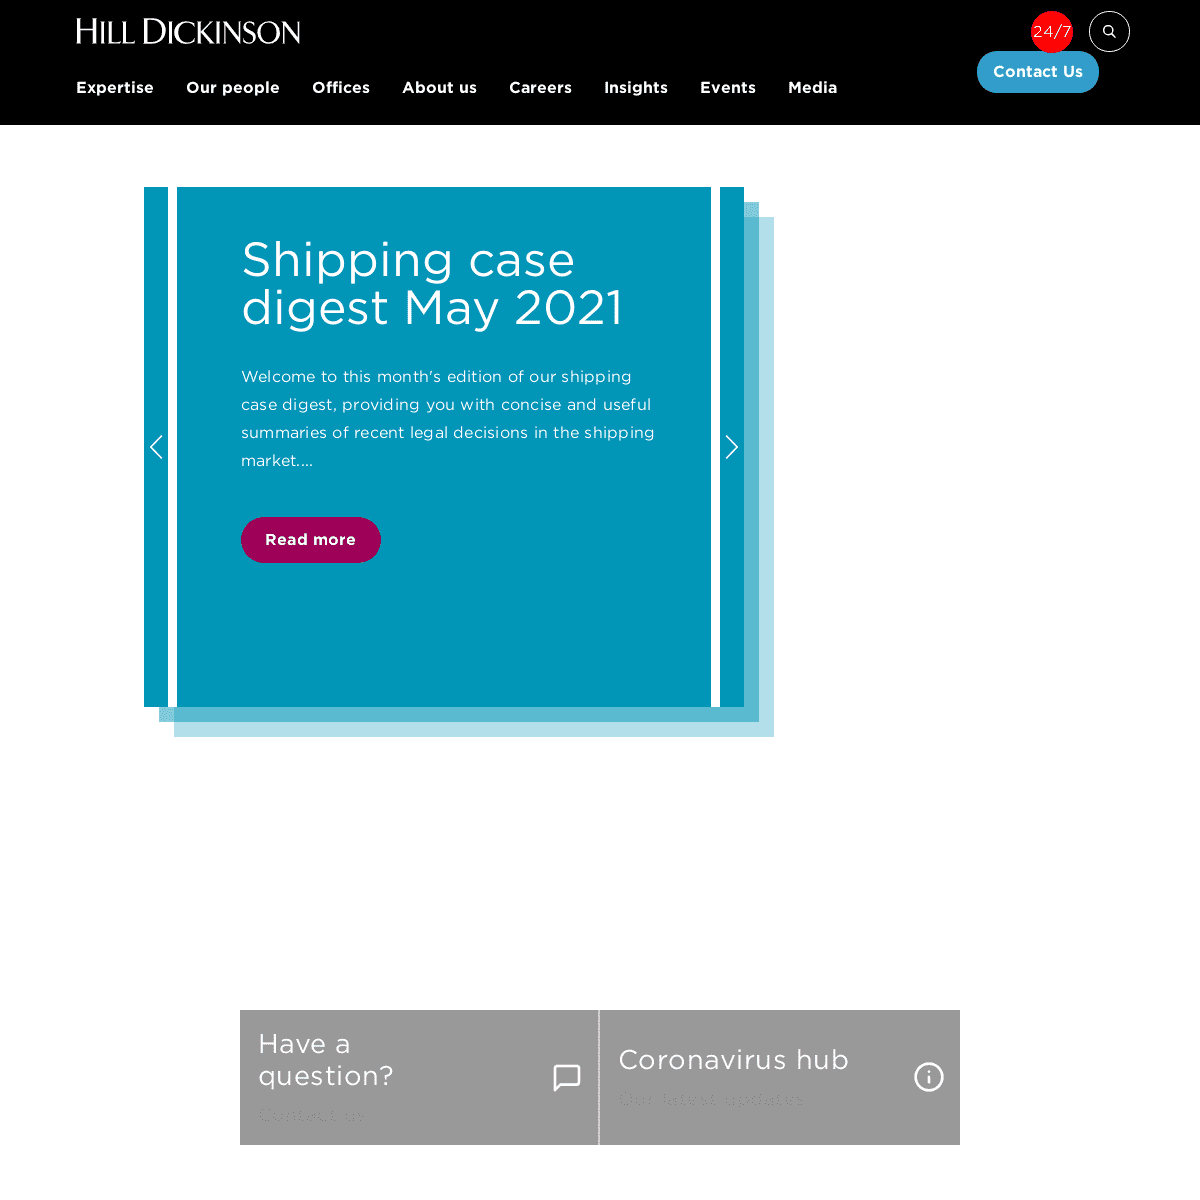 A complete backup of https://hilldickinson.com